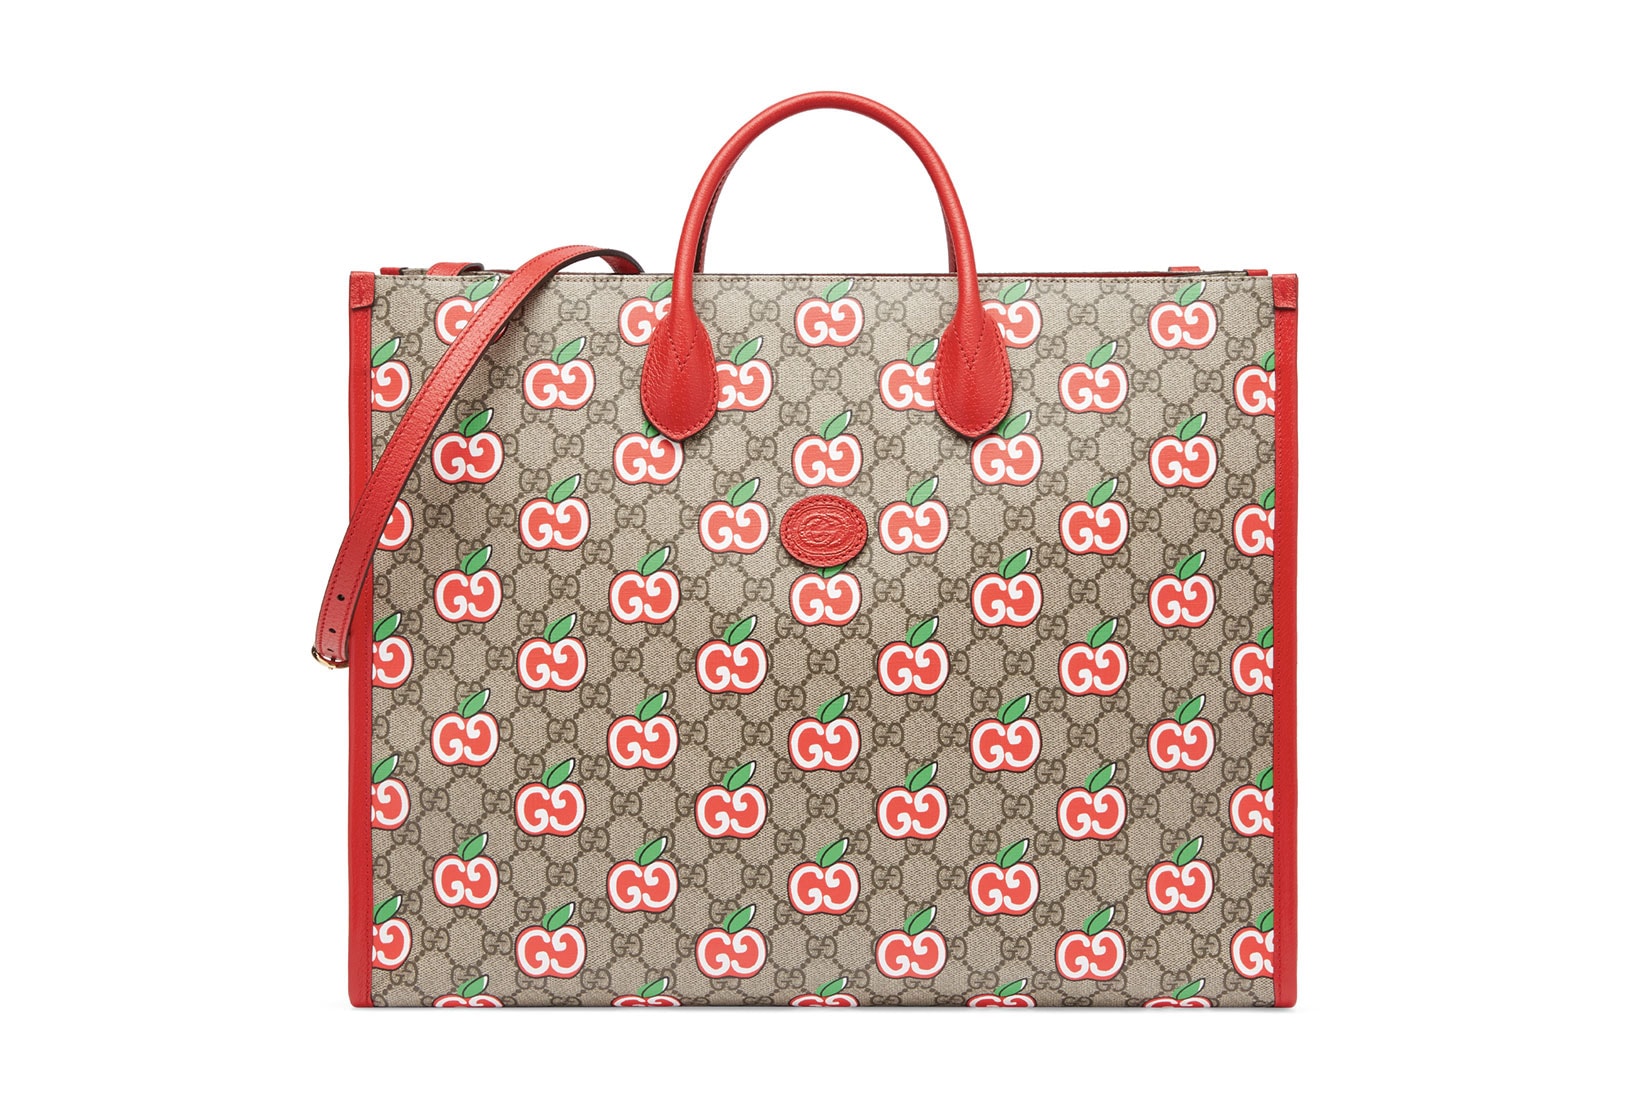 Gucci GG Apple Print for Chinese Valentine's Day | Hypebae